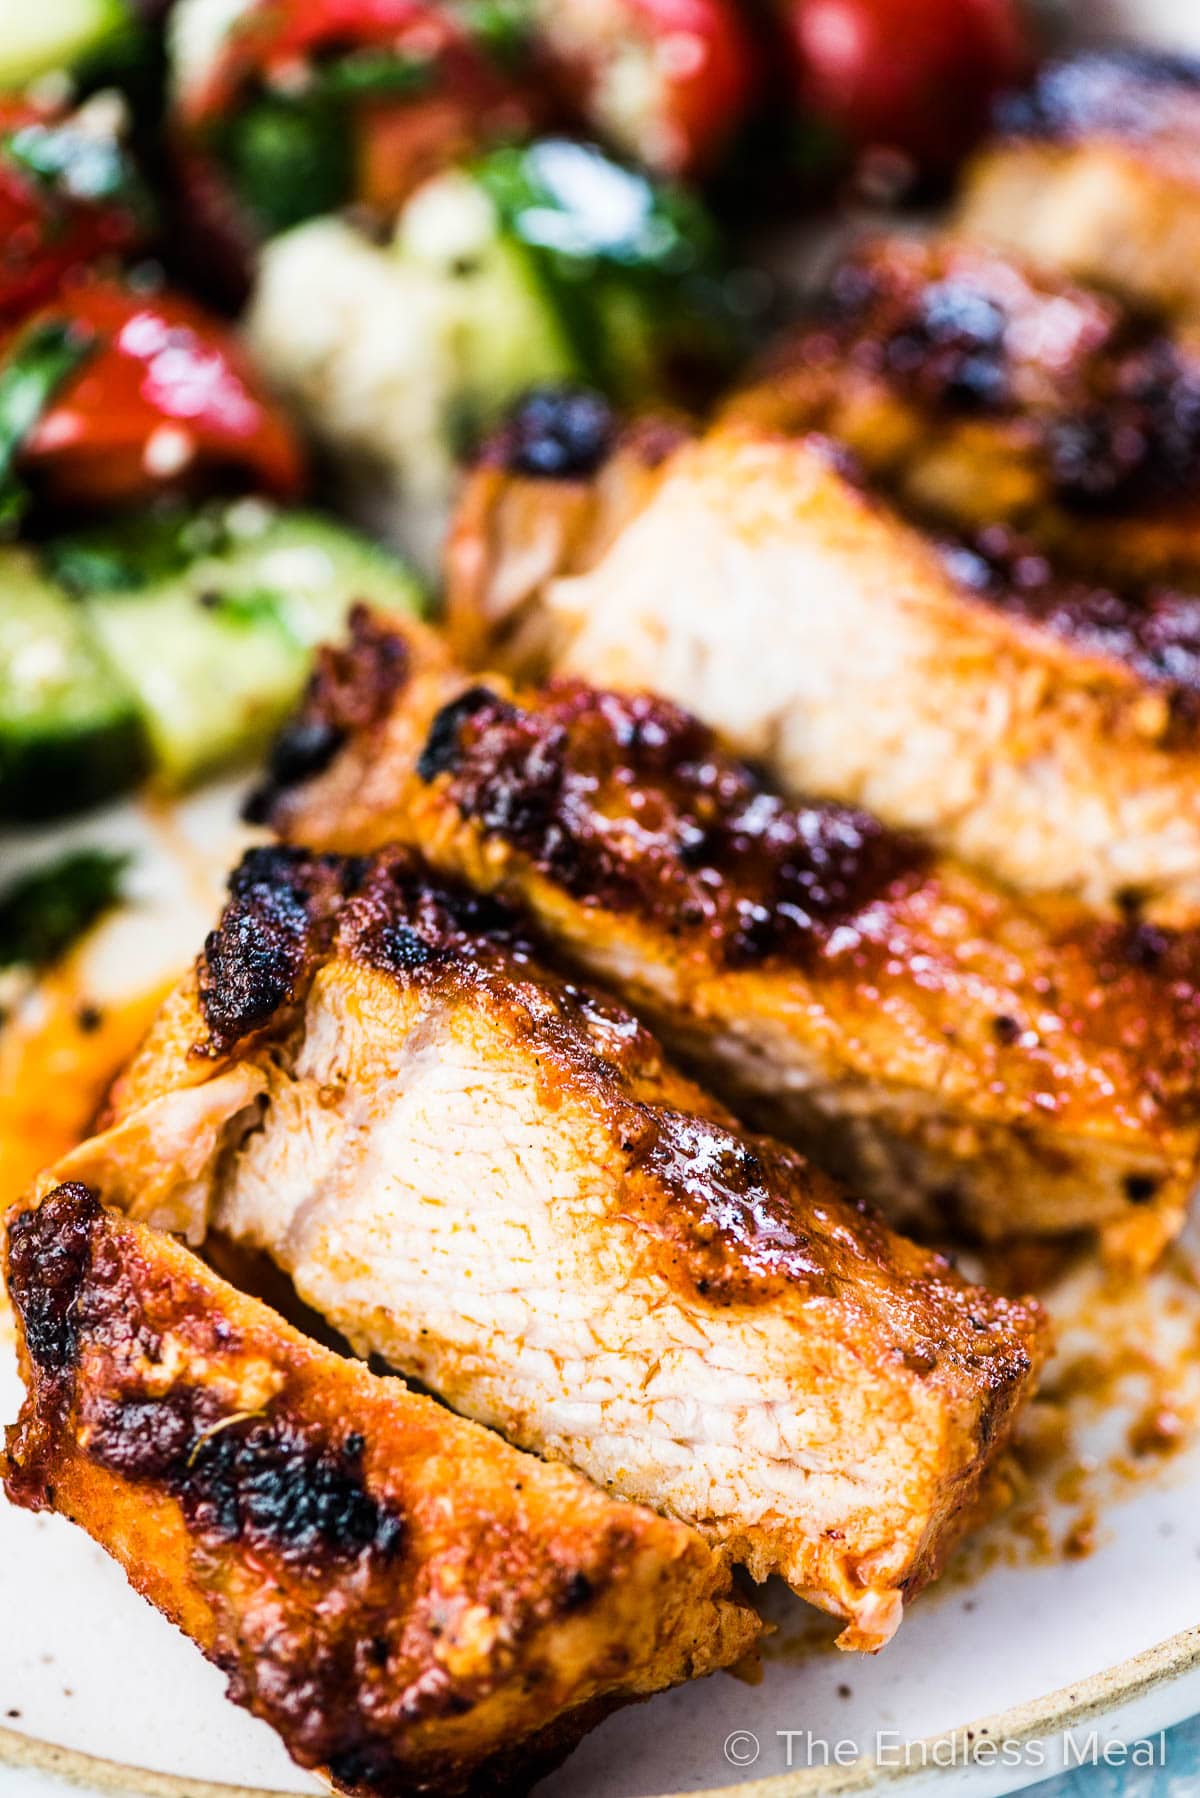 A close up of sliced juicy bbq pork chops on a dinner plate.